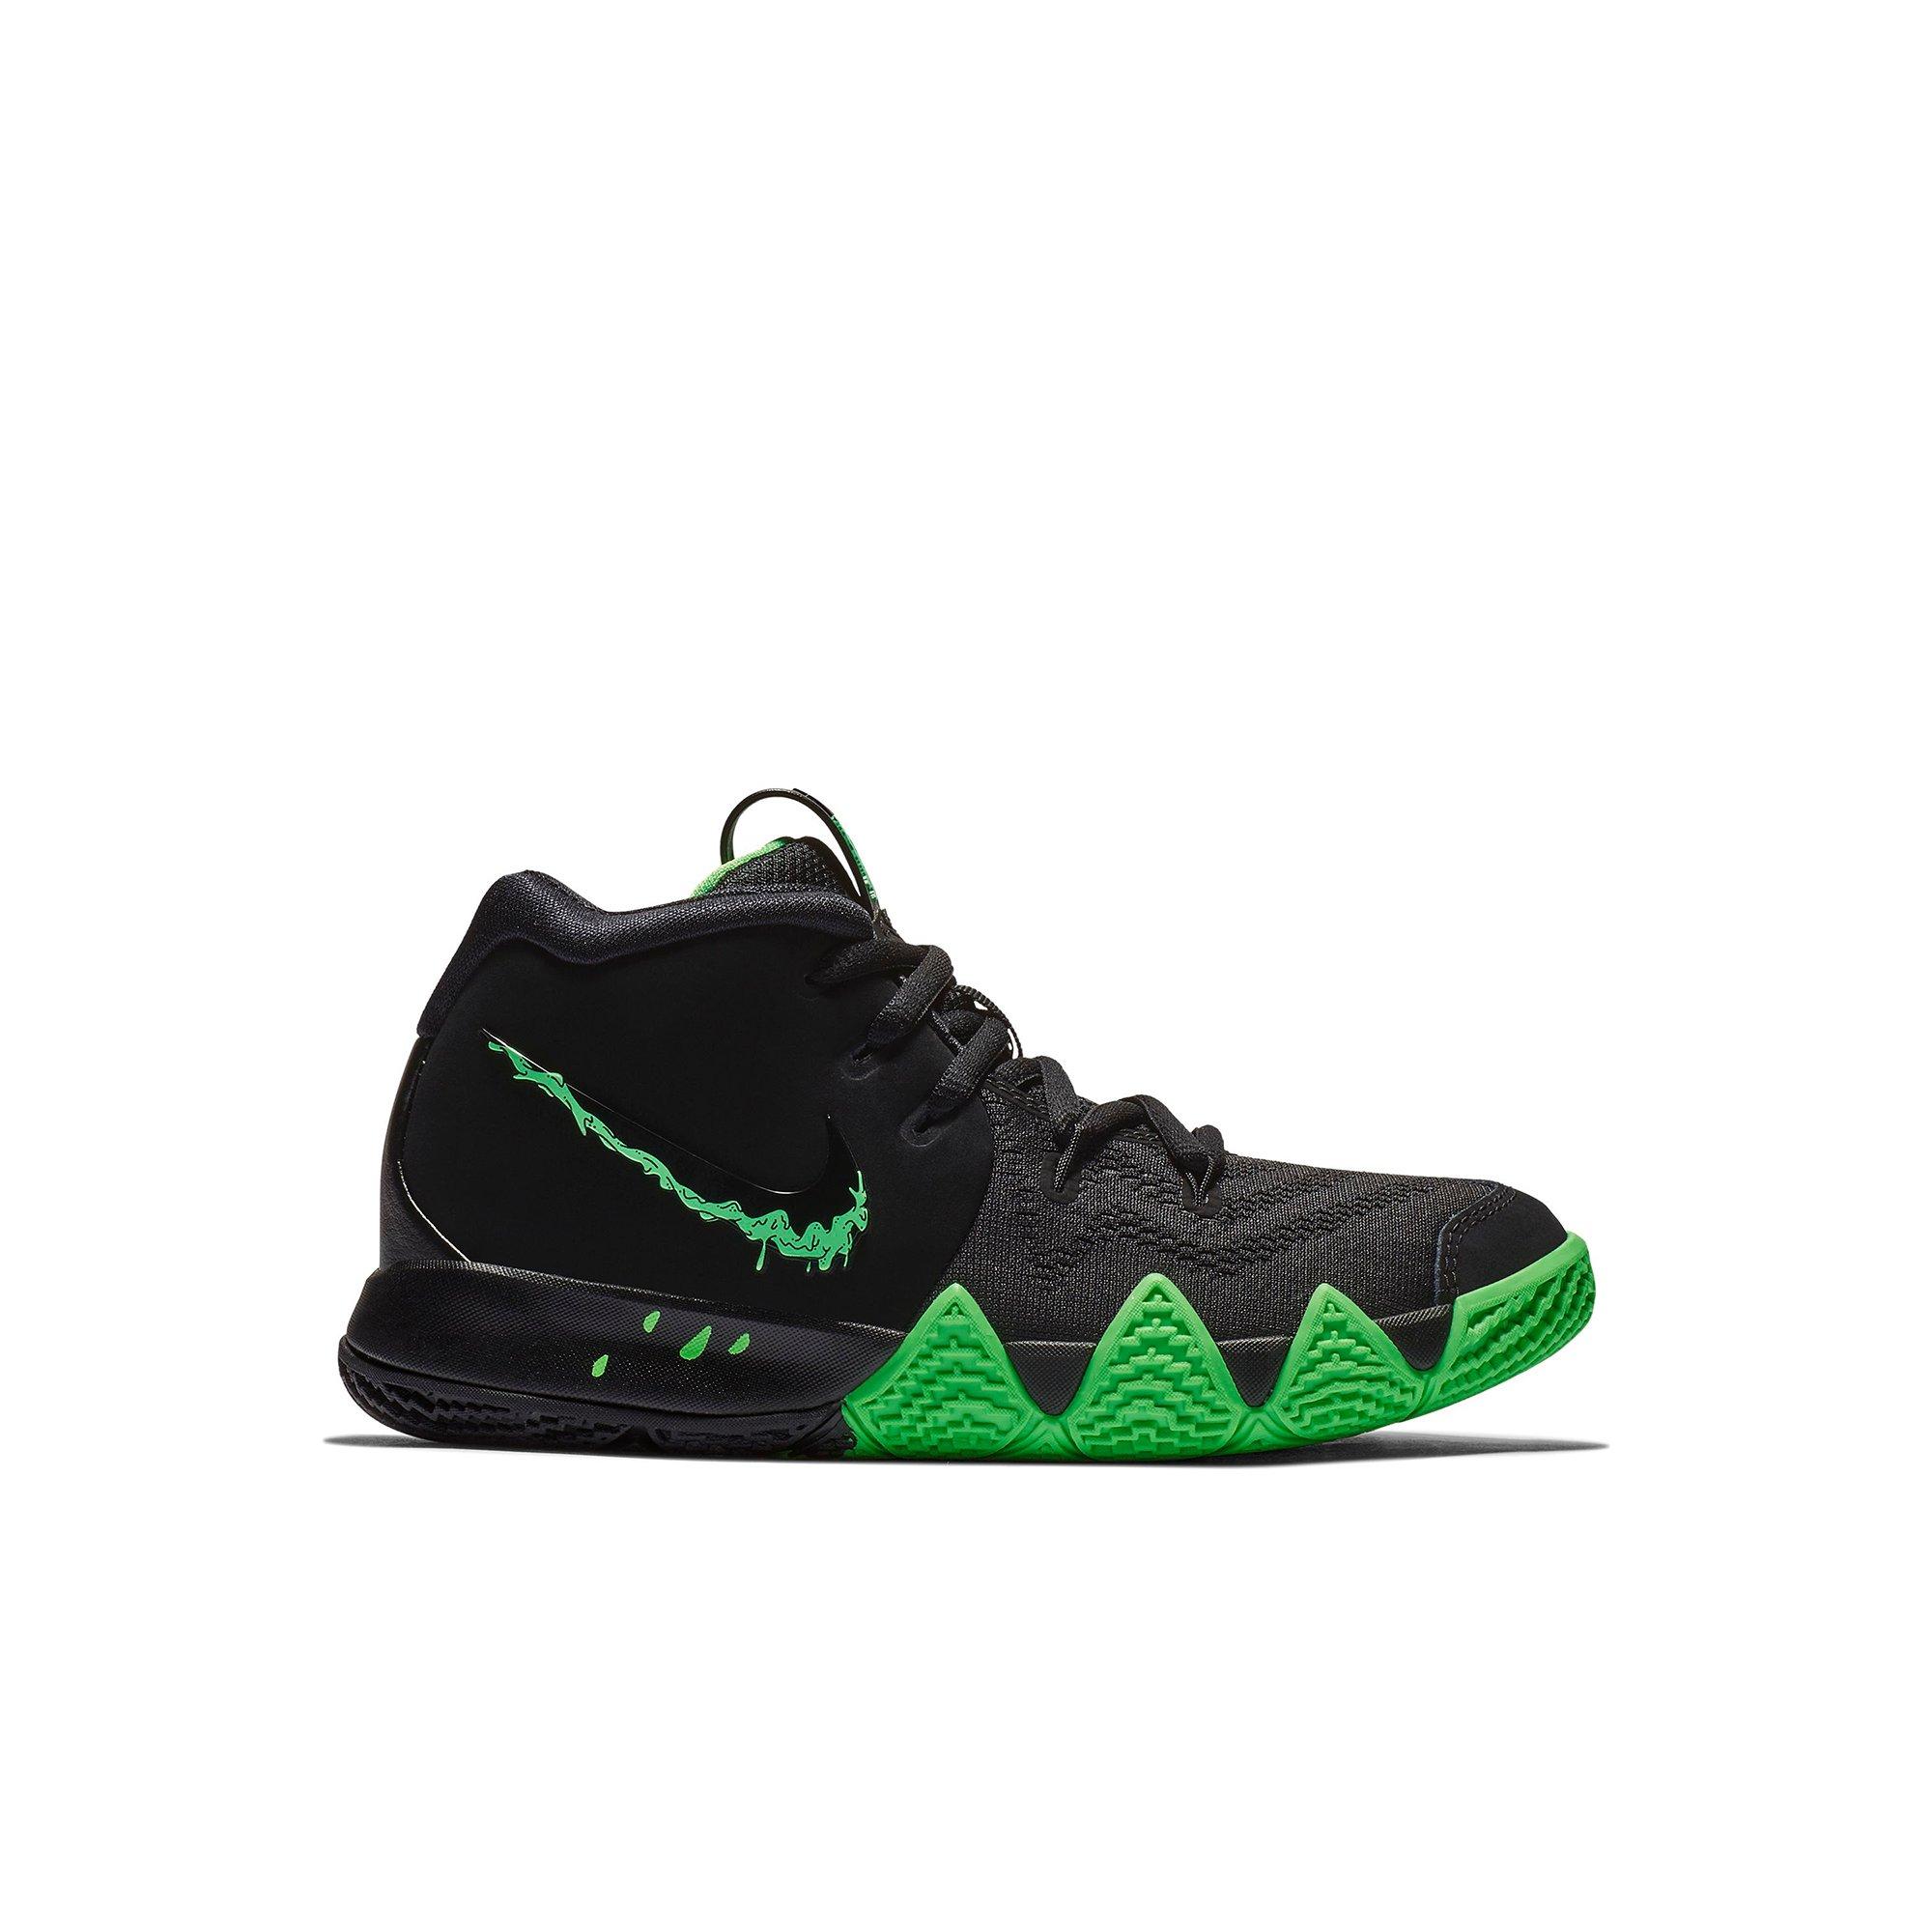 kyrie irving shoes 4 black and green